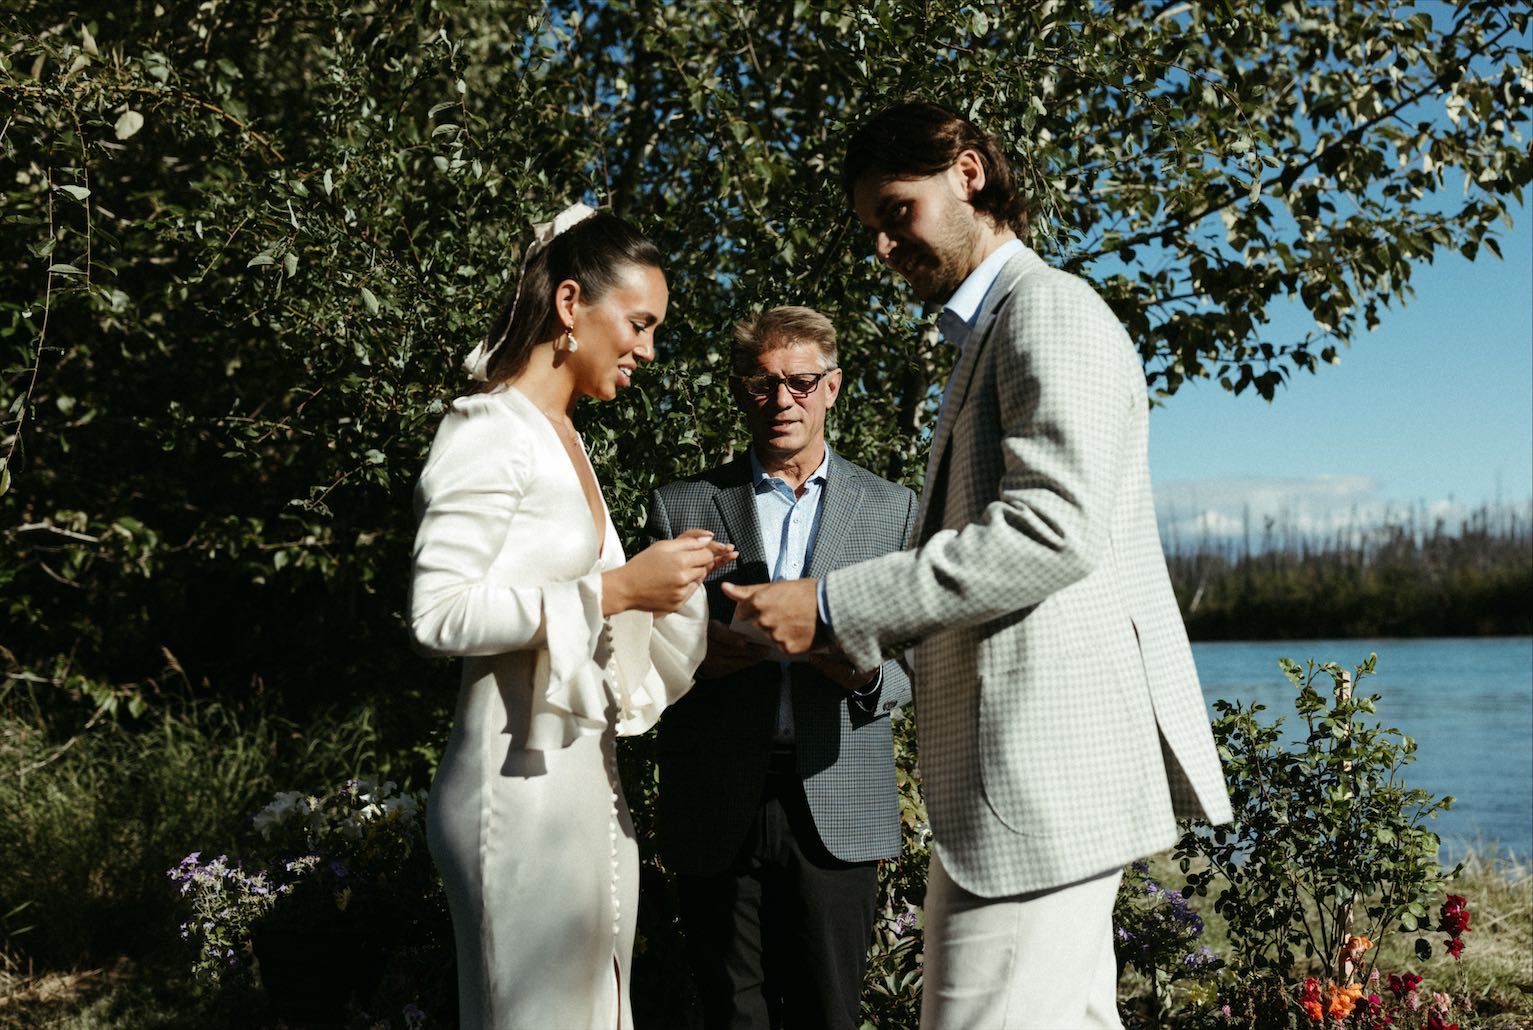 Woman putting the ring on her husbands hand during their wedding ceremony 